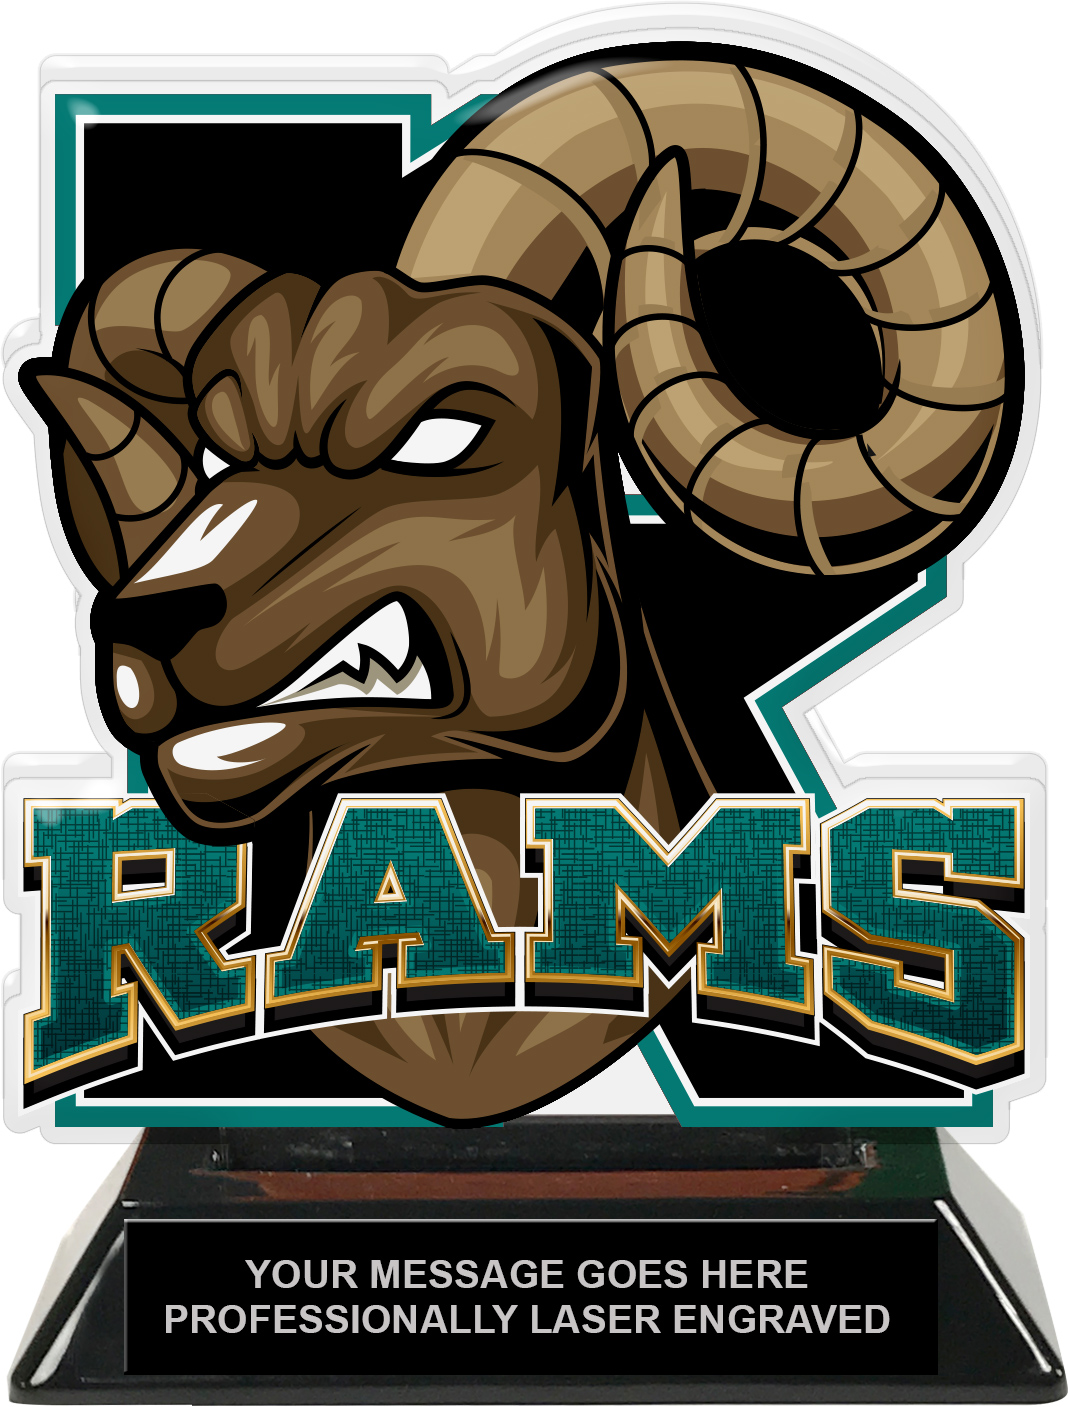 Rams Mascot Colorix-T Acrylic Trophy - 6.25 inch Teal